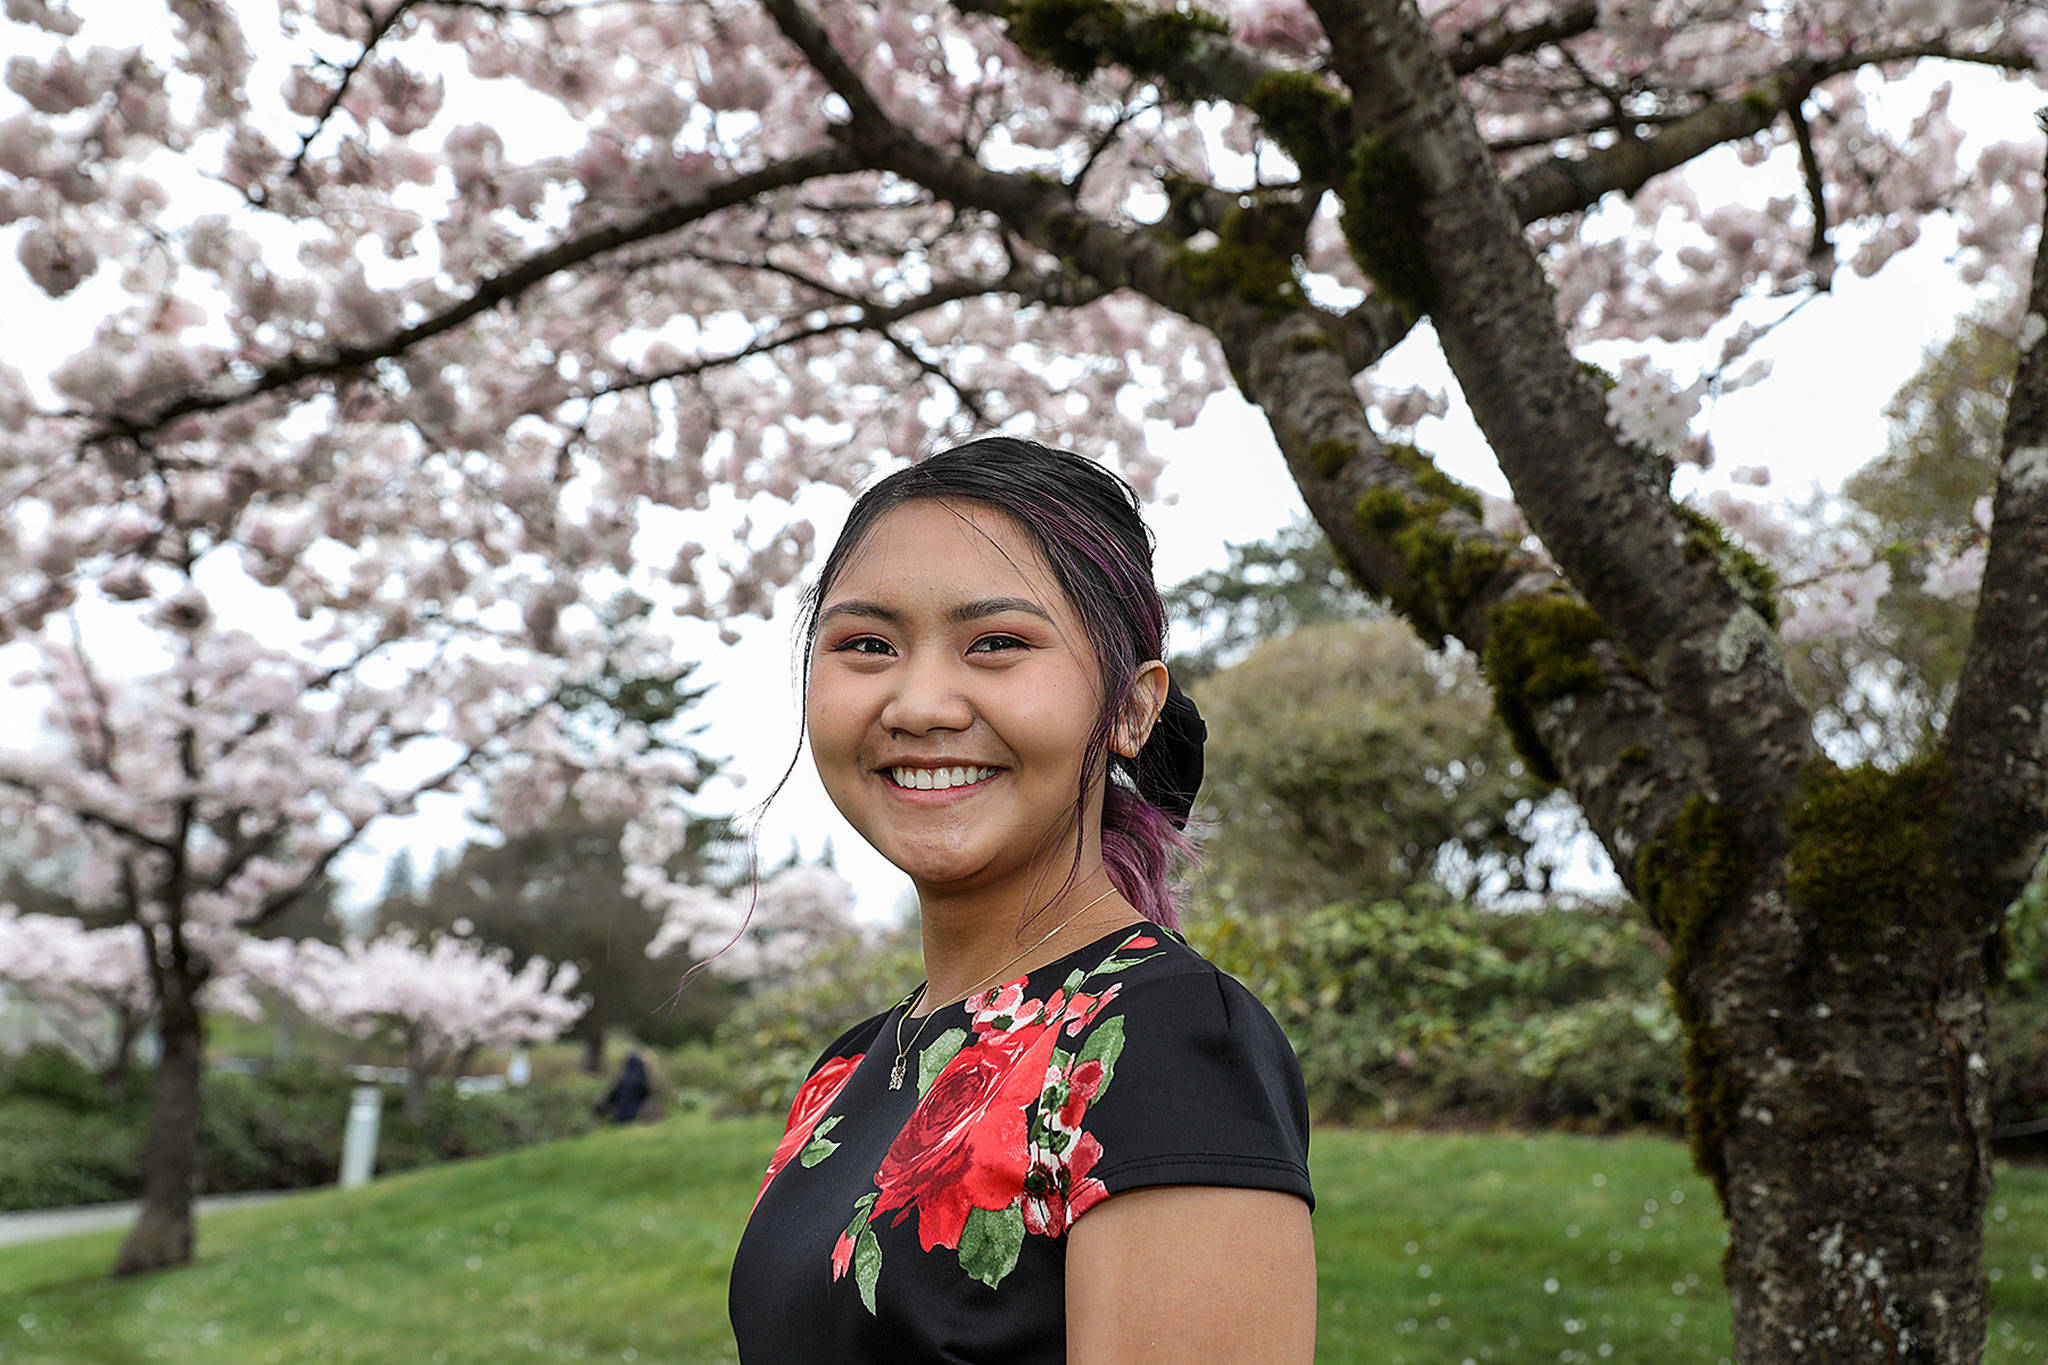 Kimberly Placido, an Everett High School senior, plans on continuing her studies at the University of Washington in Seattle this fall. (Lizz Giordano / The Herald)